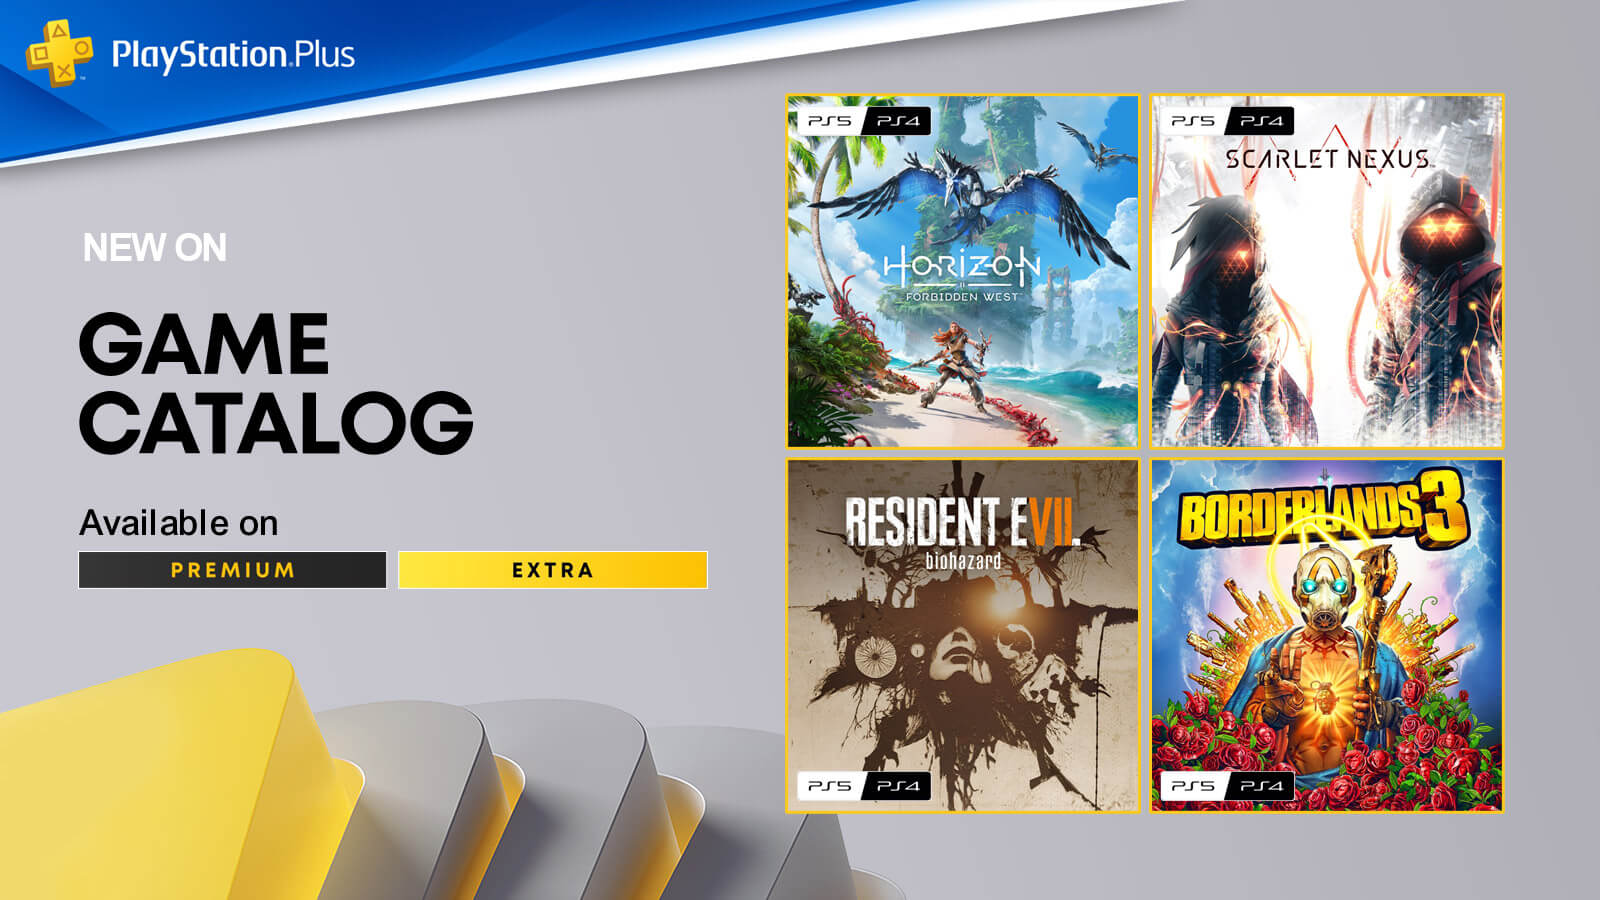 billbil-kun on X: PREMIERE February 2023 PS Plus Game Catalog additions  🔹Horizon Forbidden West 🔹Scarlet Nexus 🔹Resident Evil 7: Biohazard  🔹Borderlands 3 🔹And more to come ⌛️Available from February 21th  #PlaystationPlus #Extra #